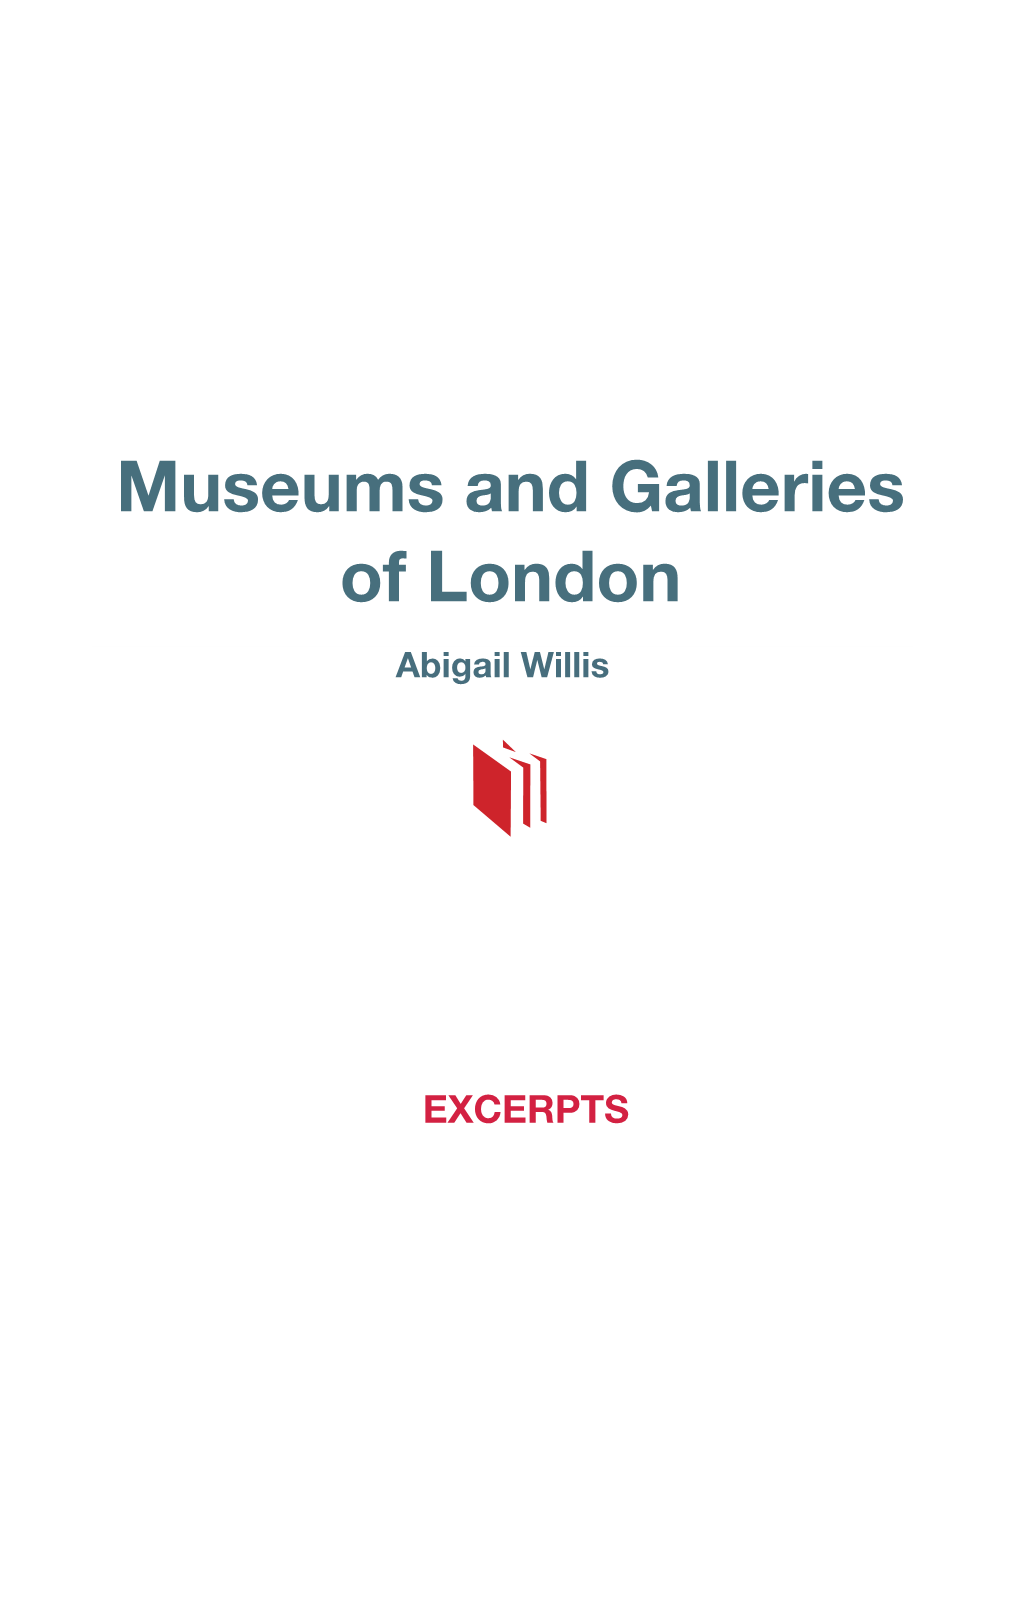 Museums and Galleries of London Abigail Willis